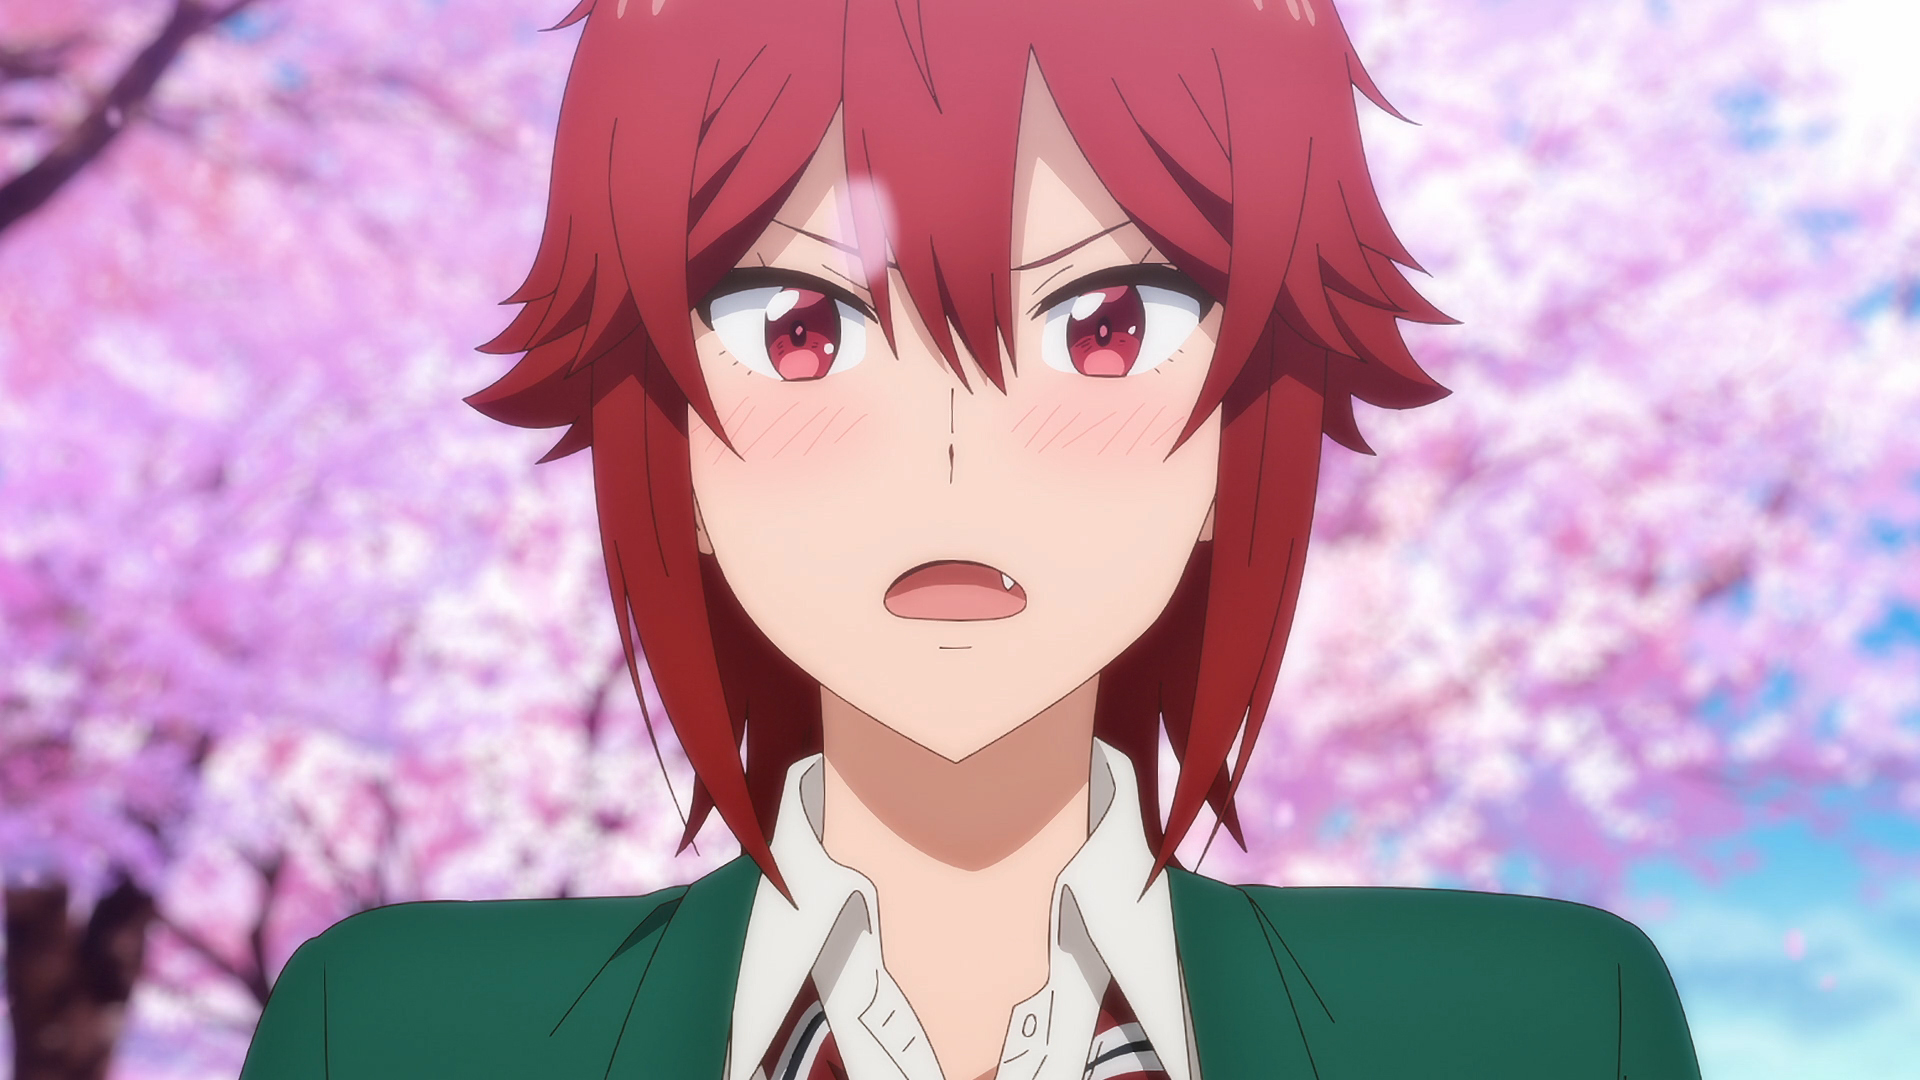 Tomo-chan Is a Girl! Delivers Masterful Comedy in Episode 2